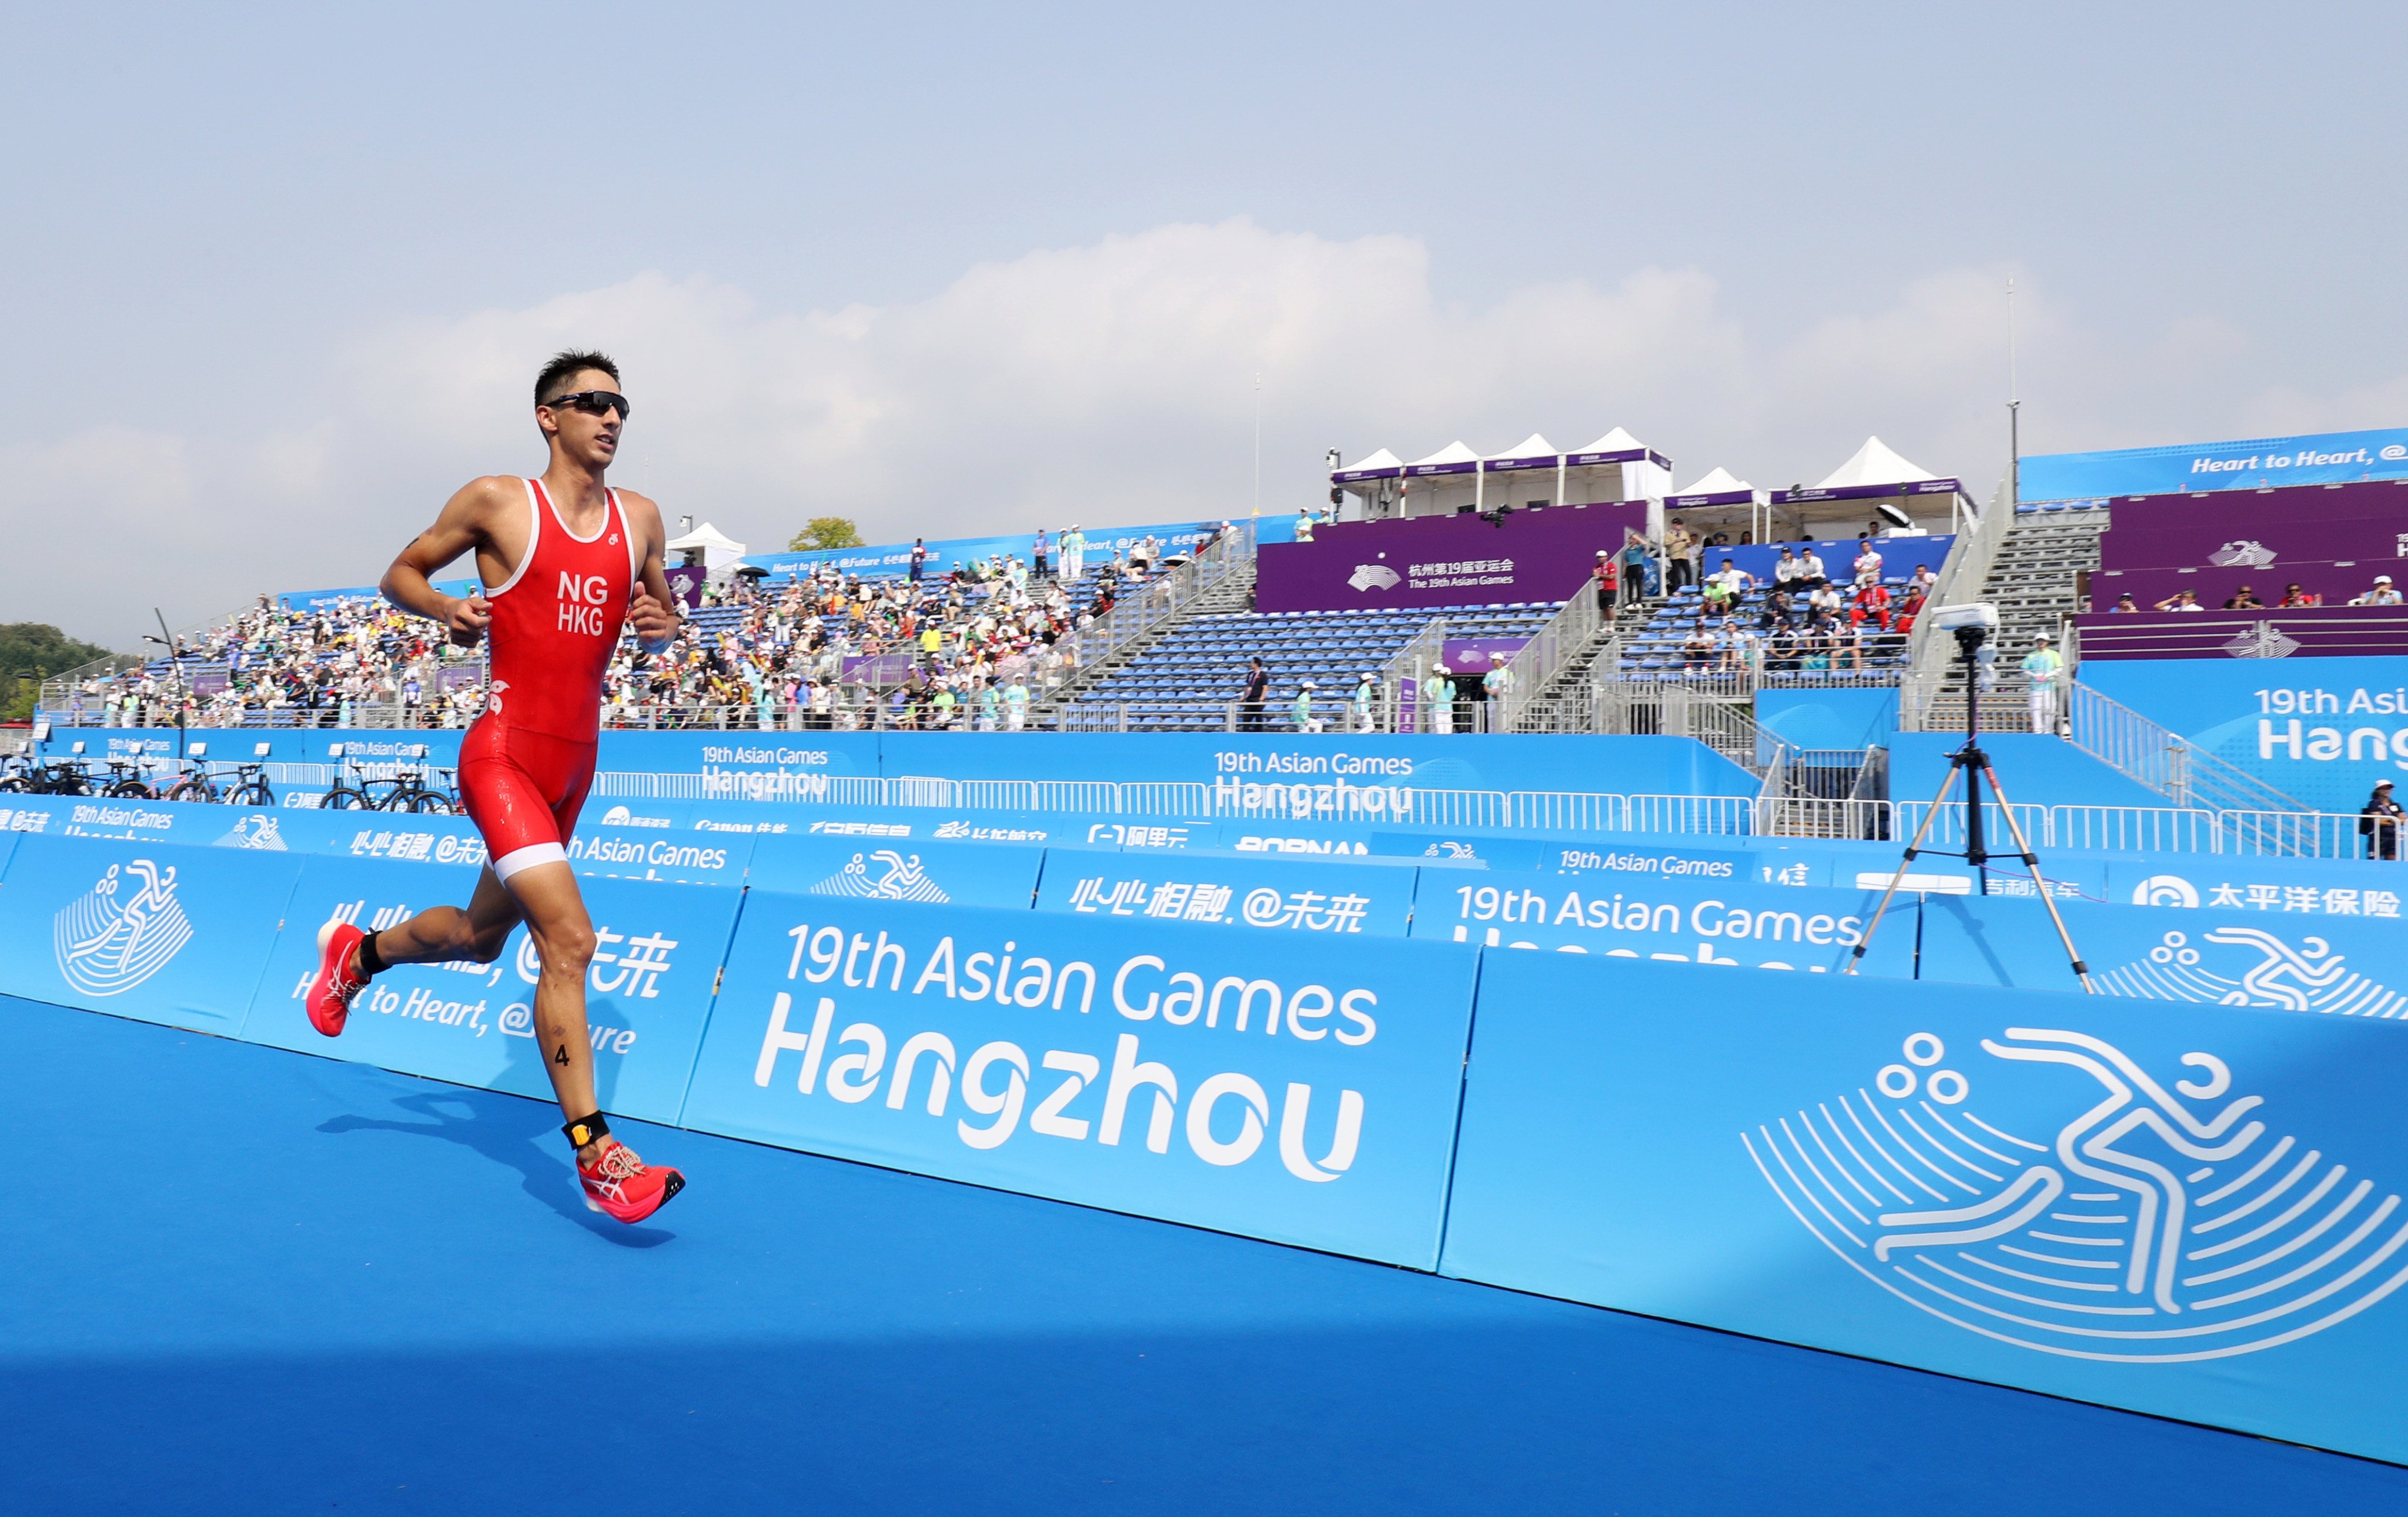 Hong Kong’s Olympic aspirant Jason Ng finished his race in 54 minutes 27 seconds to capture fourth spot. Photo: SF&OC